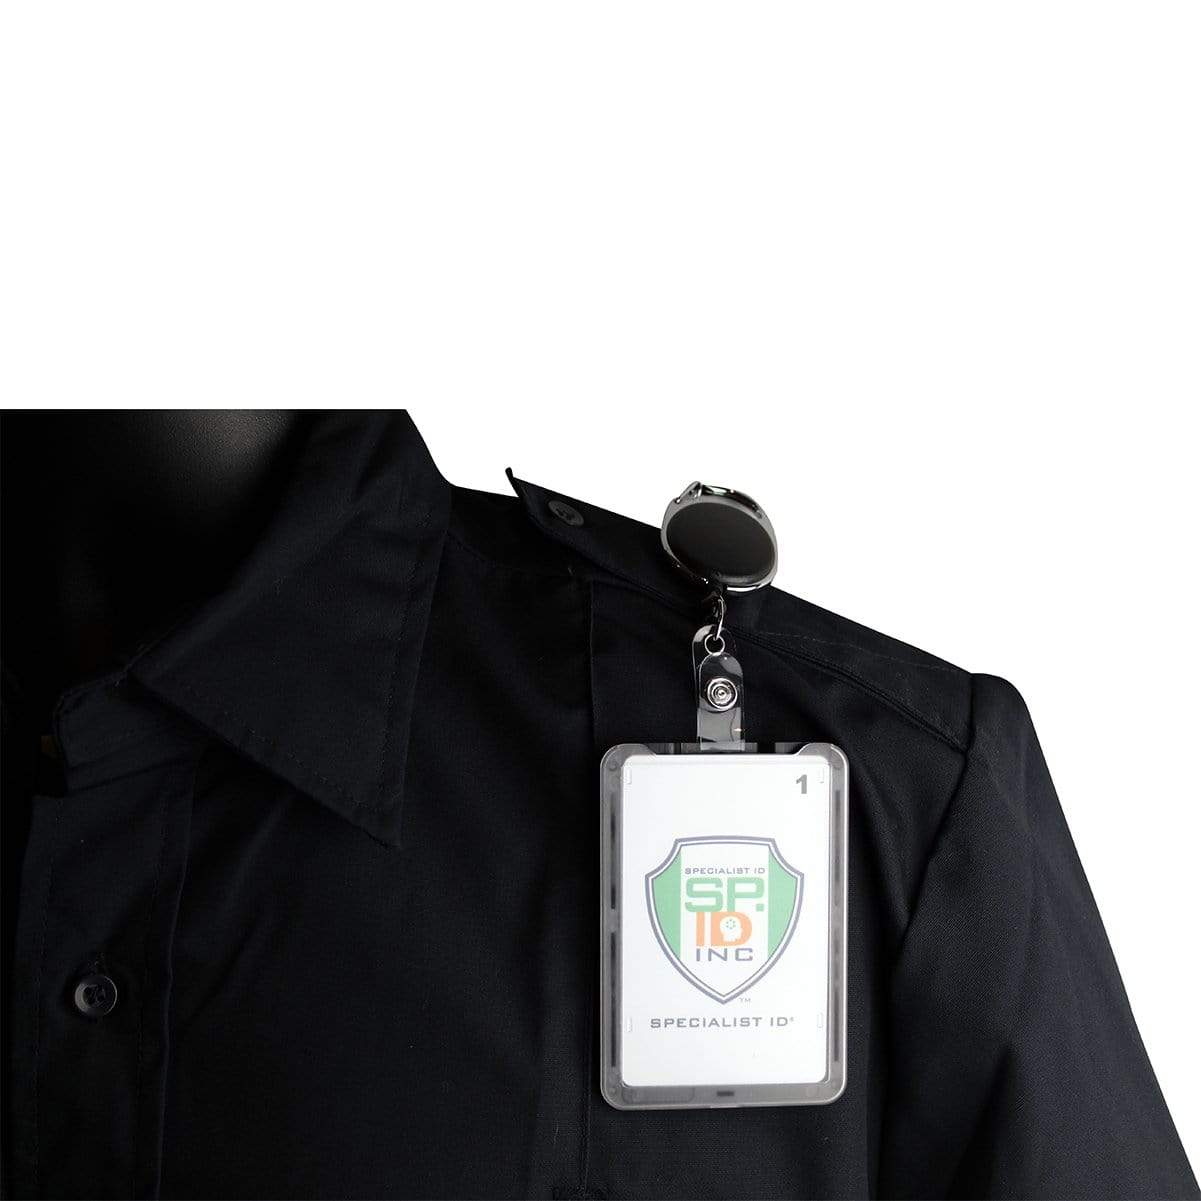 Close-up of a person wearing a black uniform with a Specialist ID badge securely attached to the shirt pocket via a rugged retractable badge reel. The badge, neatly held in a Hard Plastic 3 Card Badge Holder with Badge Reel - Retractable ID Lanyard Features Belt Clip & Carabiner - Rigid Vertical CAC Holder - Top Load Holds Three Cards by SpecialistID, proudly displays a logo and text.